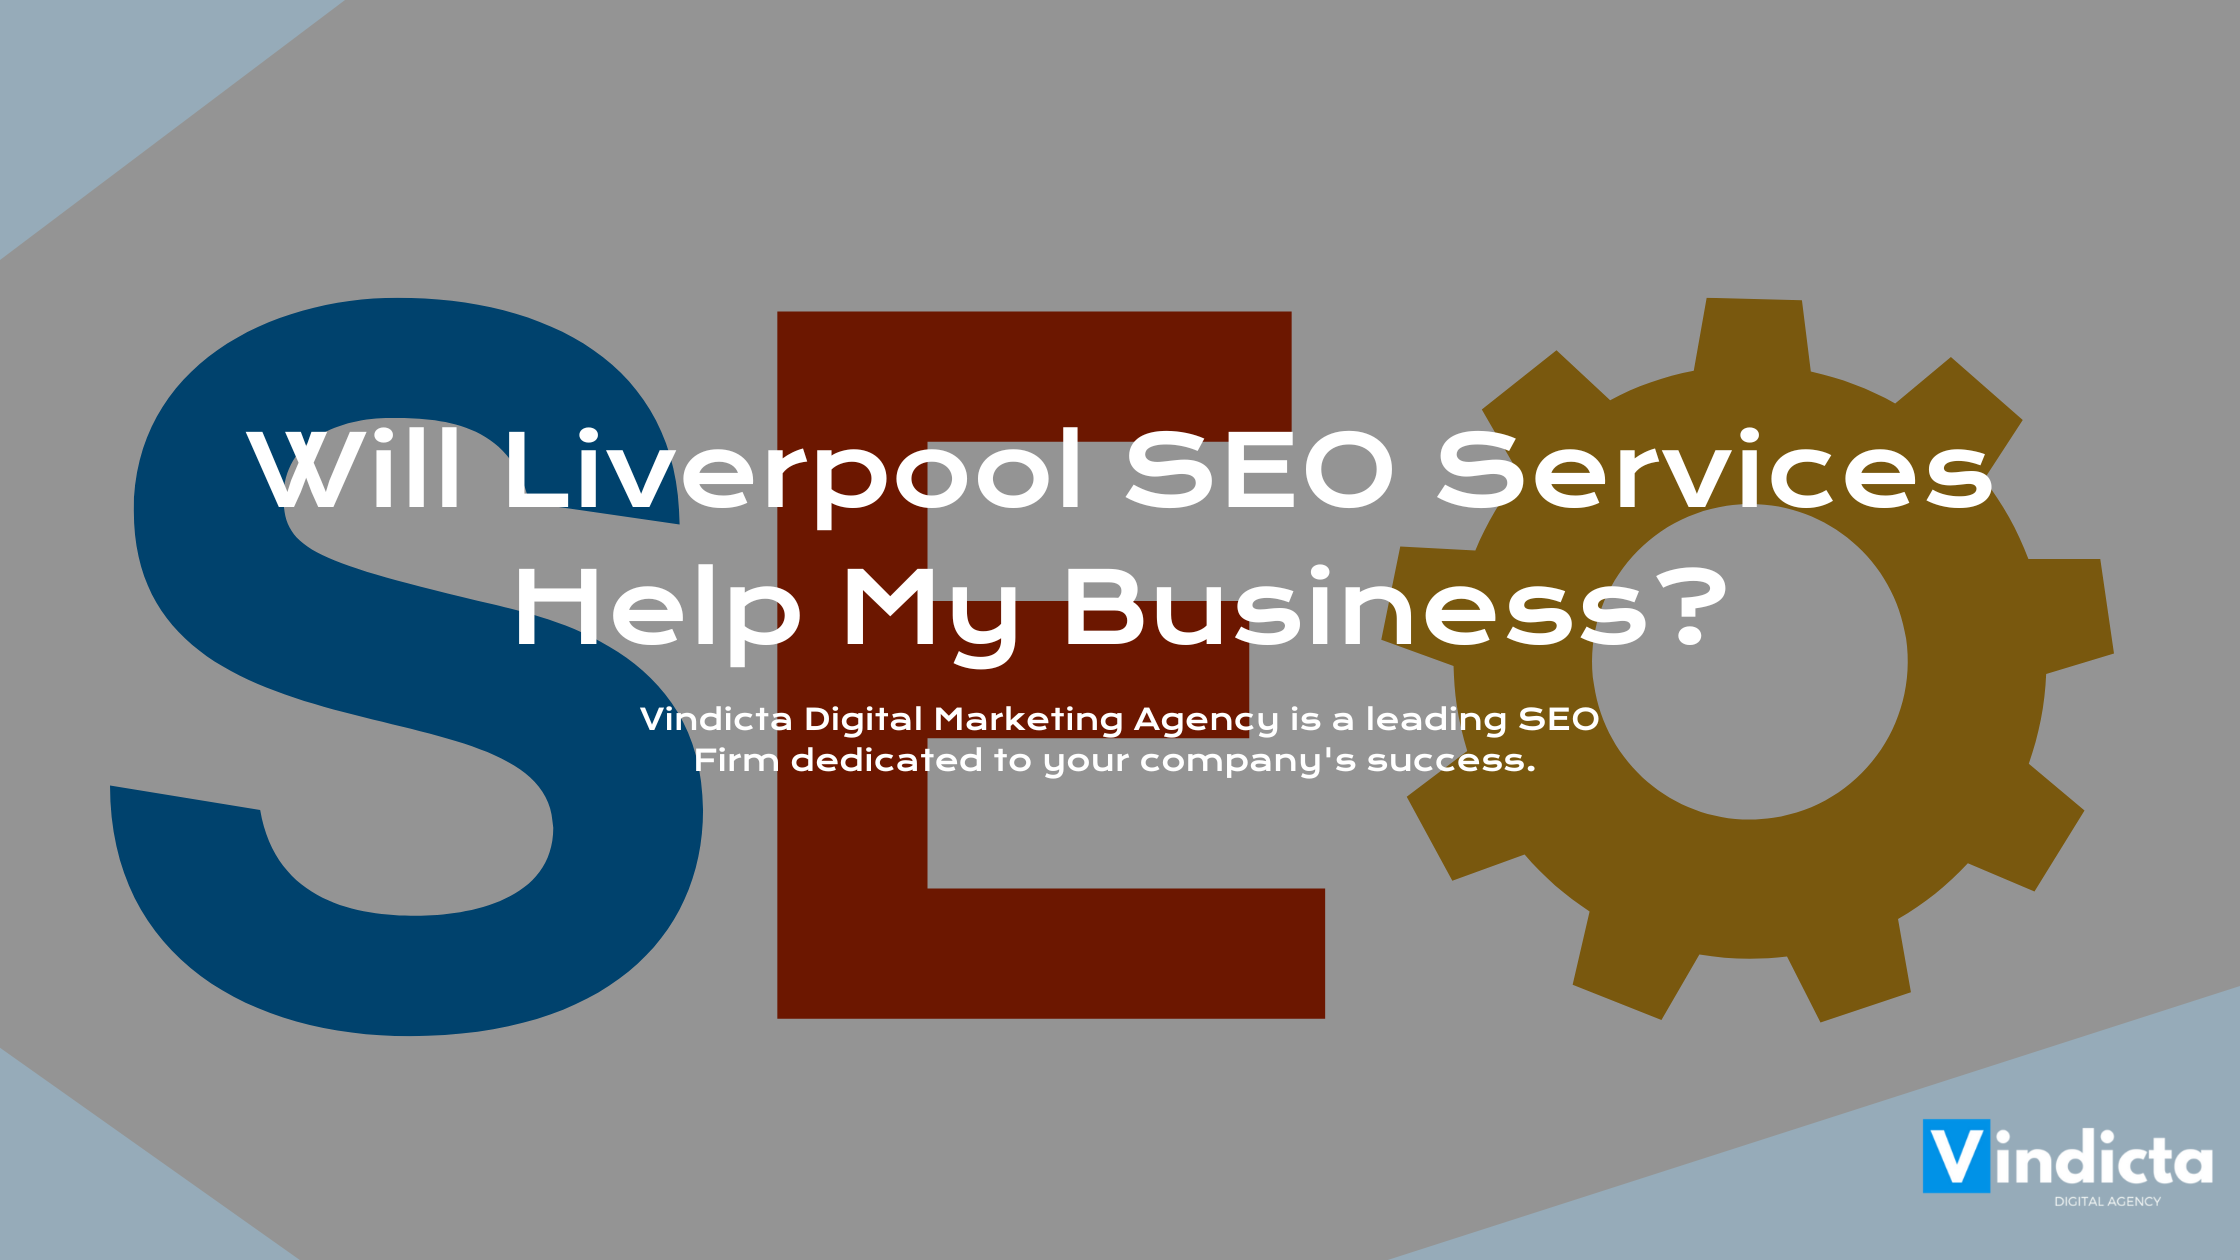 Will Liverpool SEO Services Help My Business?